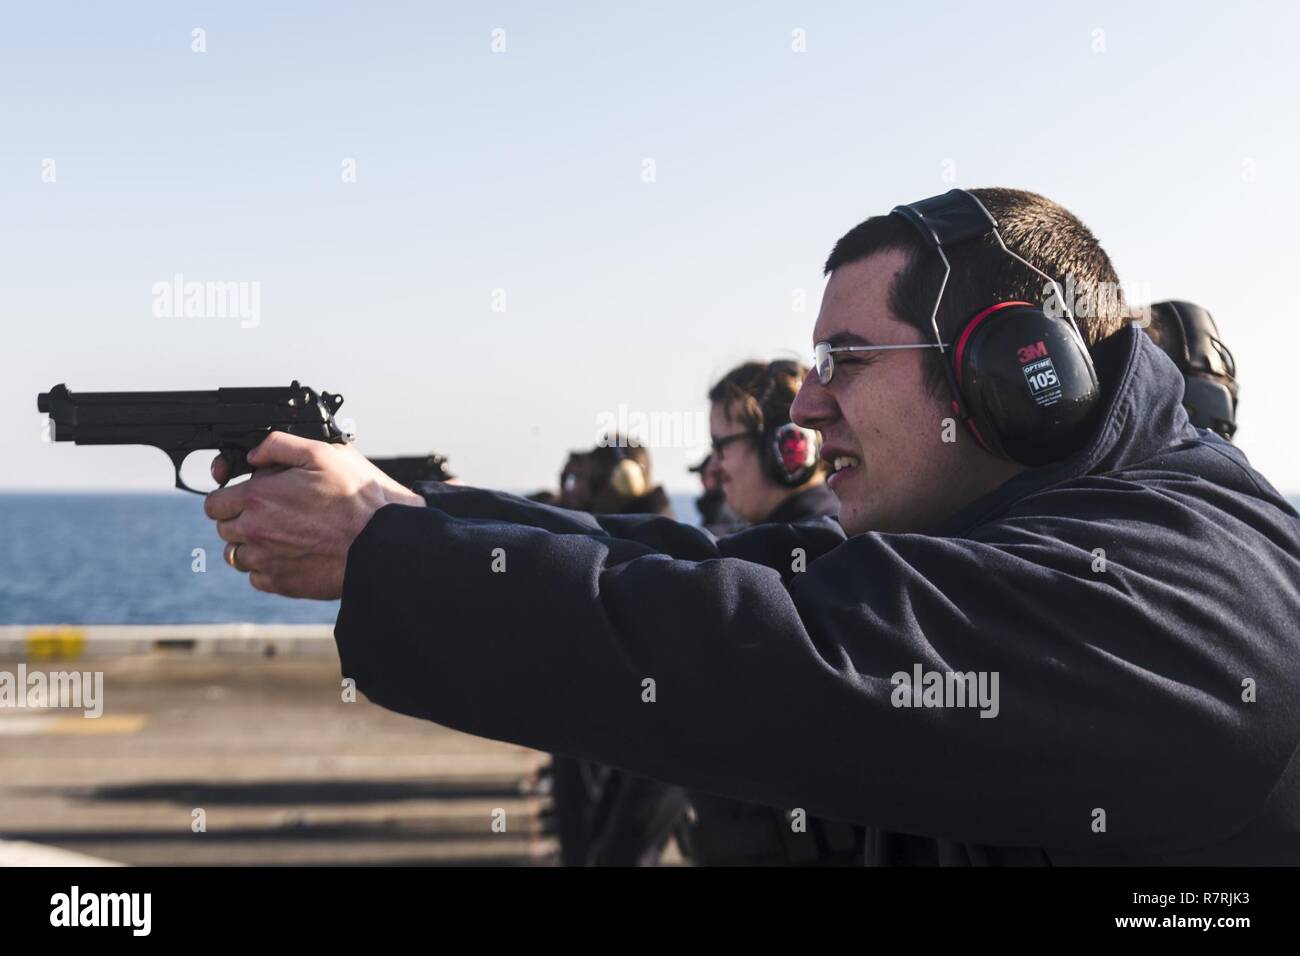 EAST CHINA SEA (April 4, 2017) Information Systems Technician 2nd Class Tyler Newvine, from Flushing, Mich., fires an M9 service pistol during a naval handgun qualification course aboard the amphibious transport dock USS Green Bay (LPD 20). Green Bay, part of the Bonhomme Richard Expeditionary Strike Group, with embarked 31st Marine Expeditionary Unit, is on a routine patrol, operating in the Indo-Asia-Pacific region to enhance warfighting readiness and posture forward as a ready-response force for any type of contingency. Stock Photo